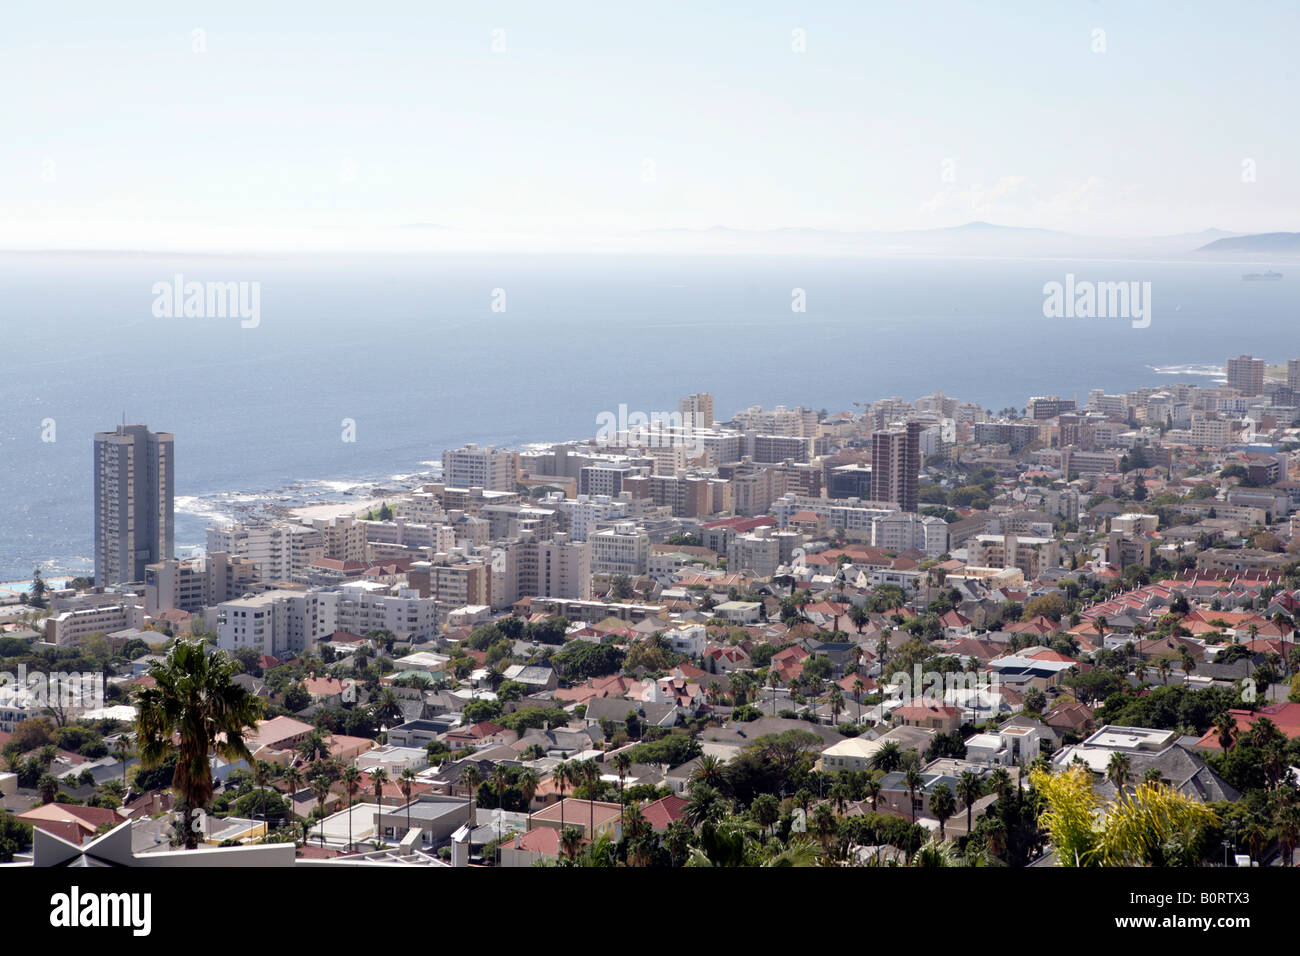 View of Sea Point area from house in Camps Bay, Cape Town, South Africa. Stock Photo